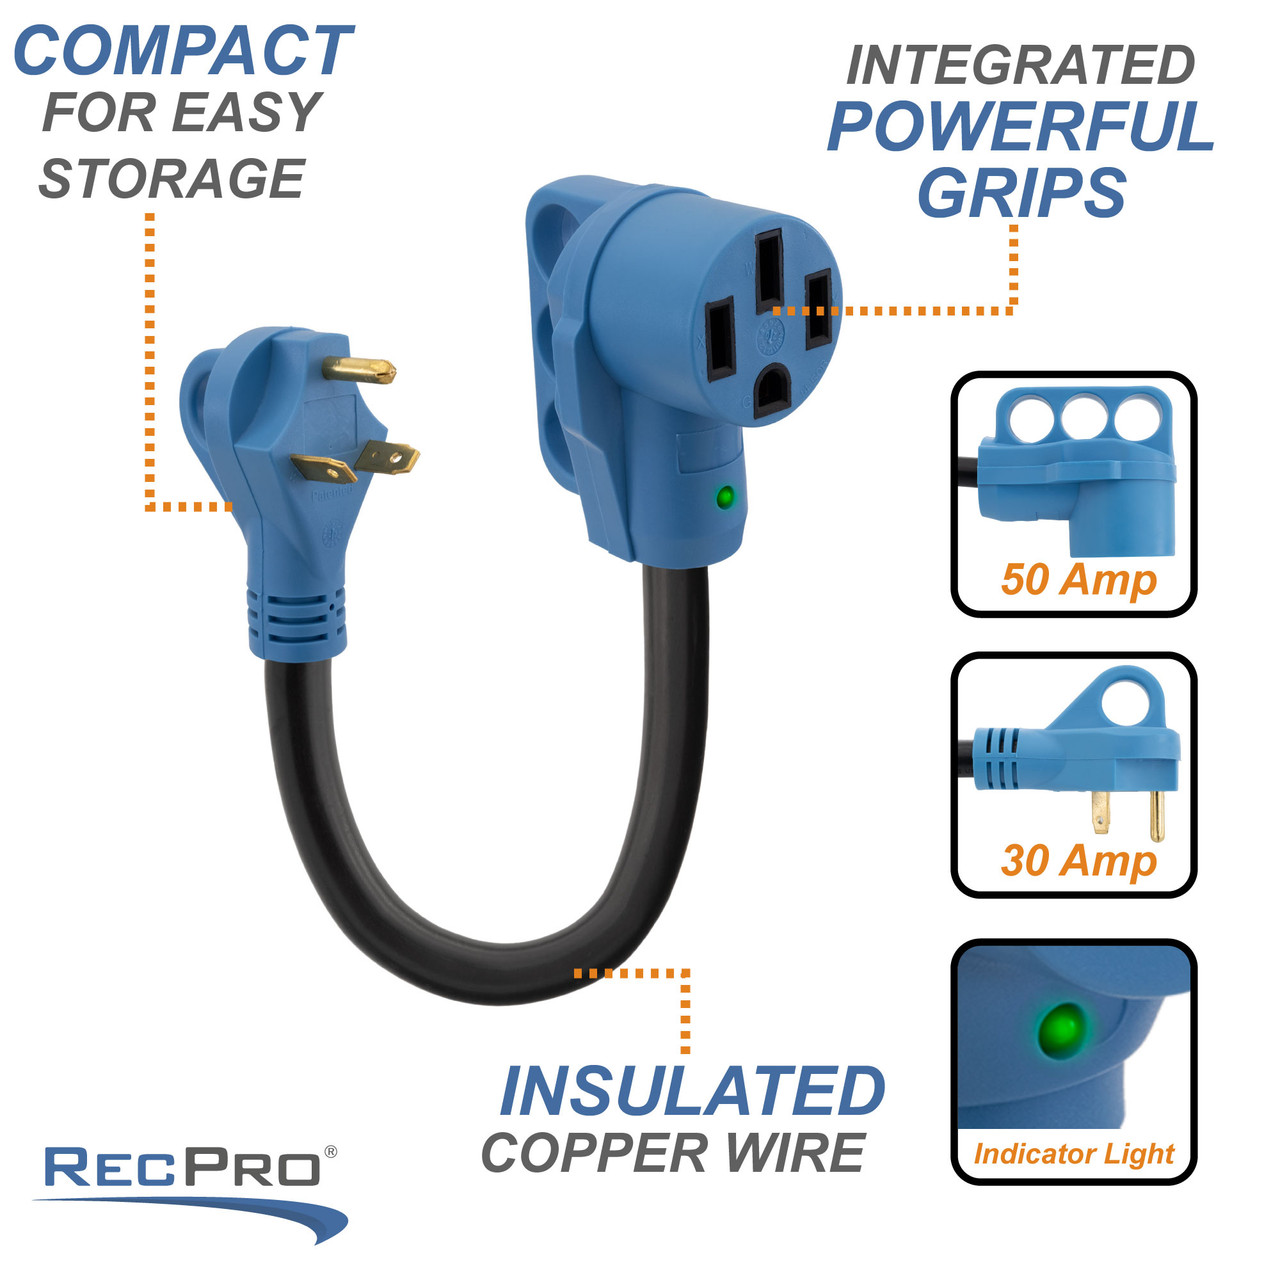 50 Amp RV Plug to 30 Amp Adapter - RecPro